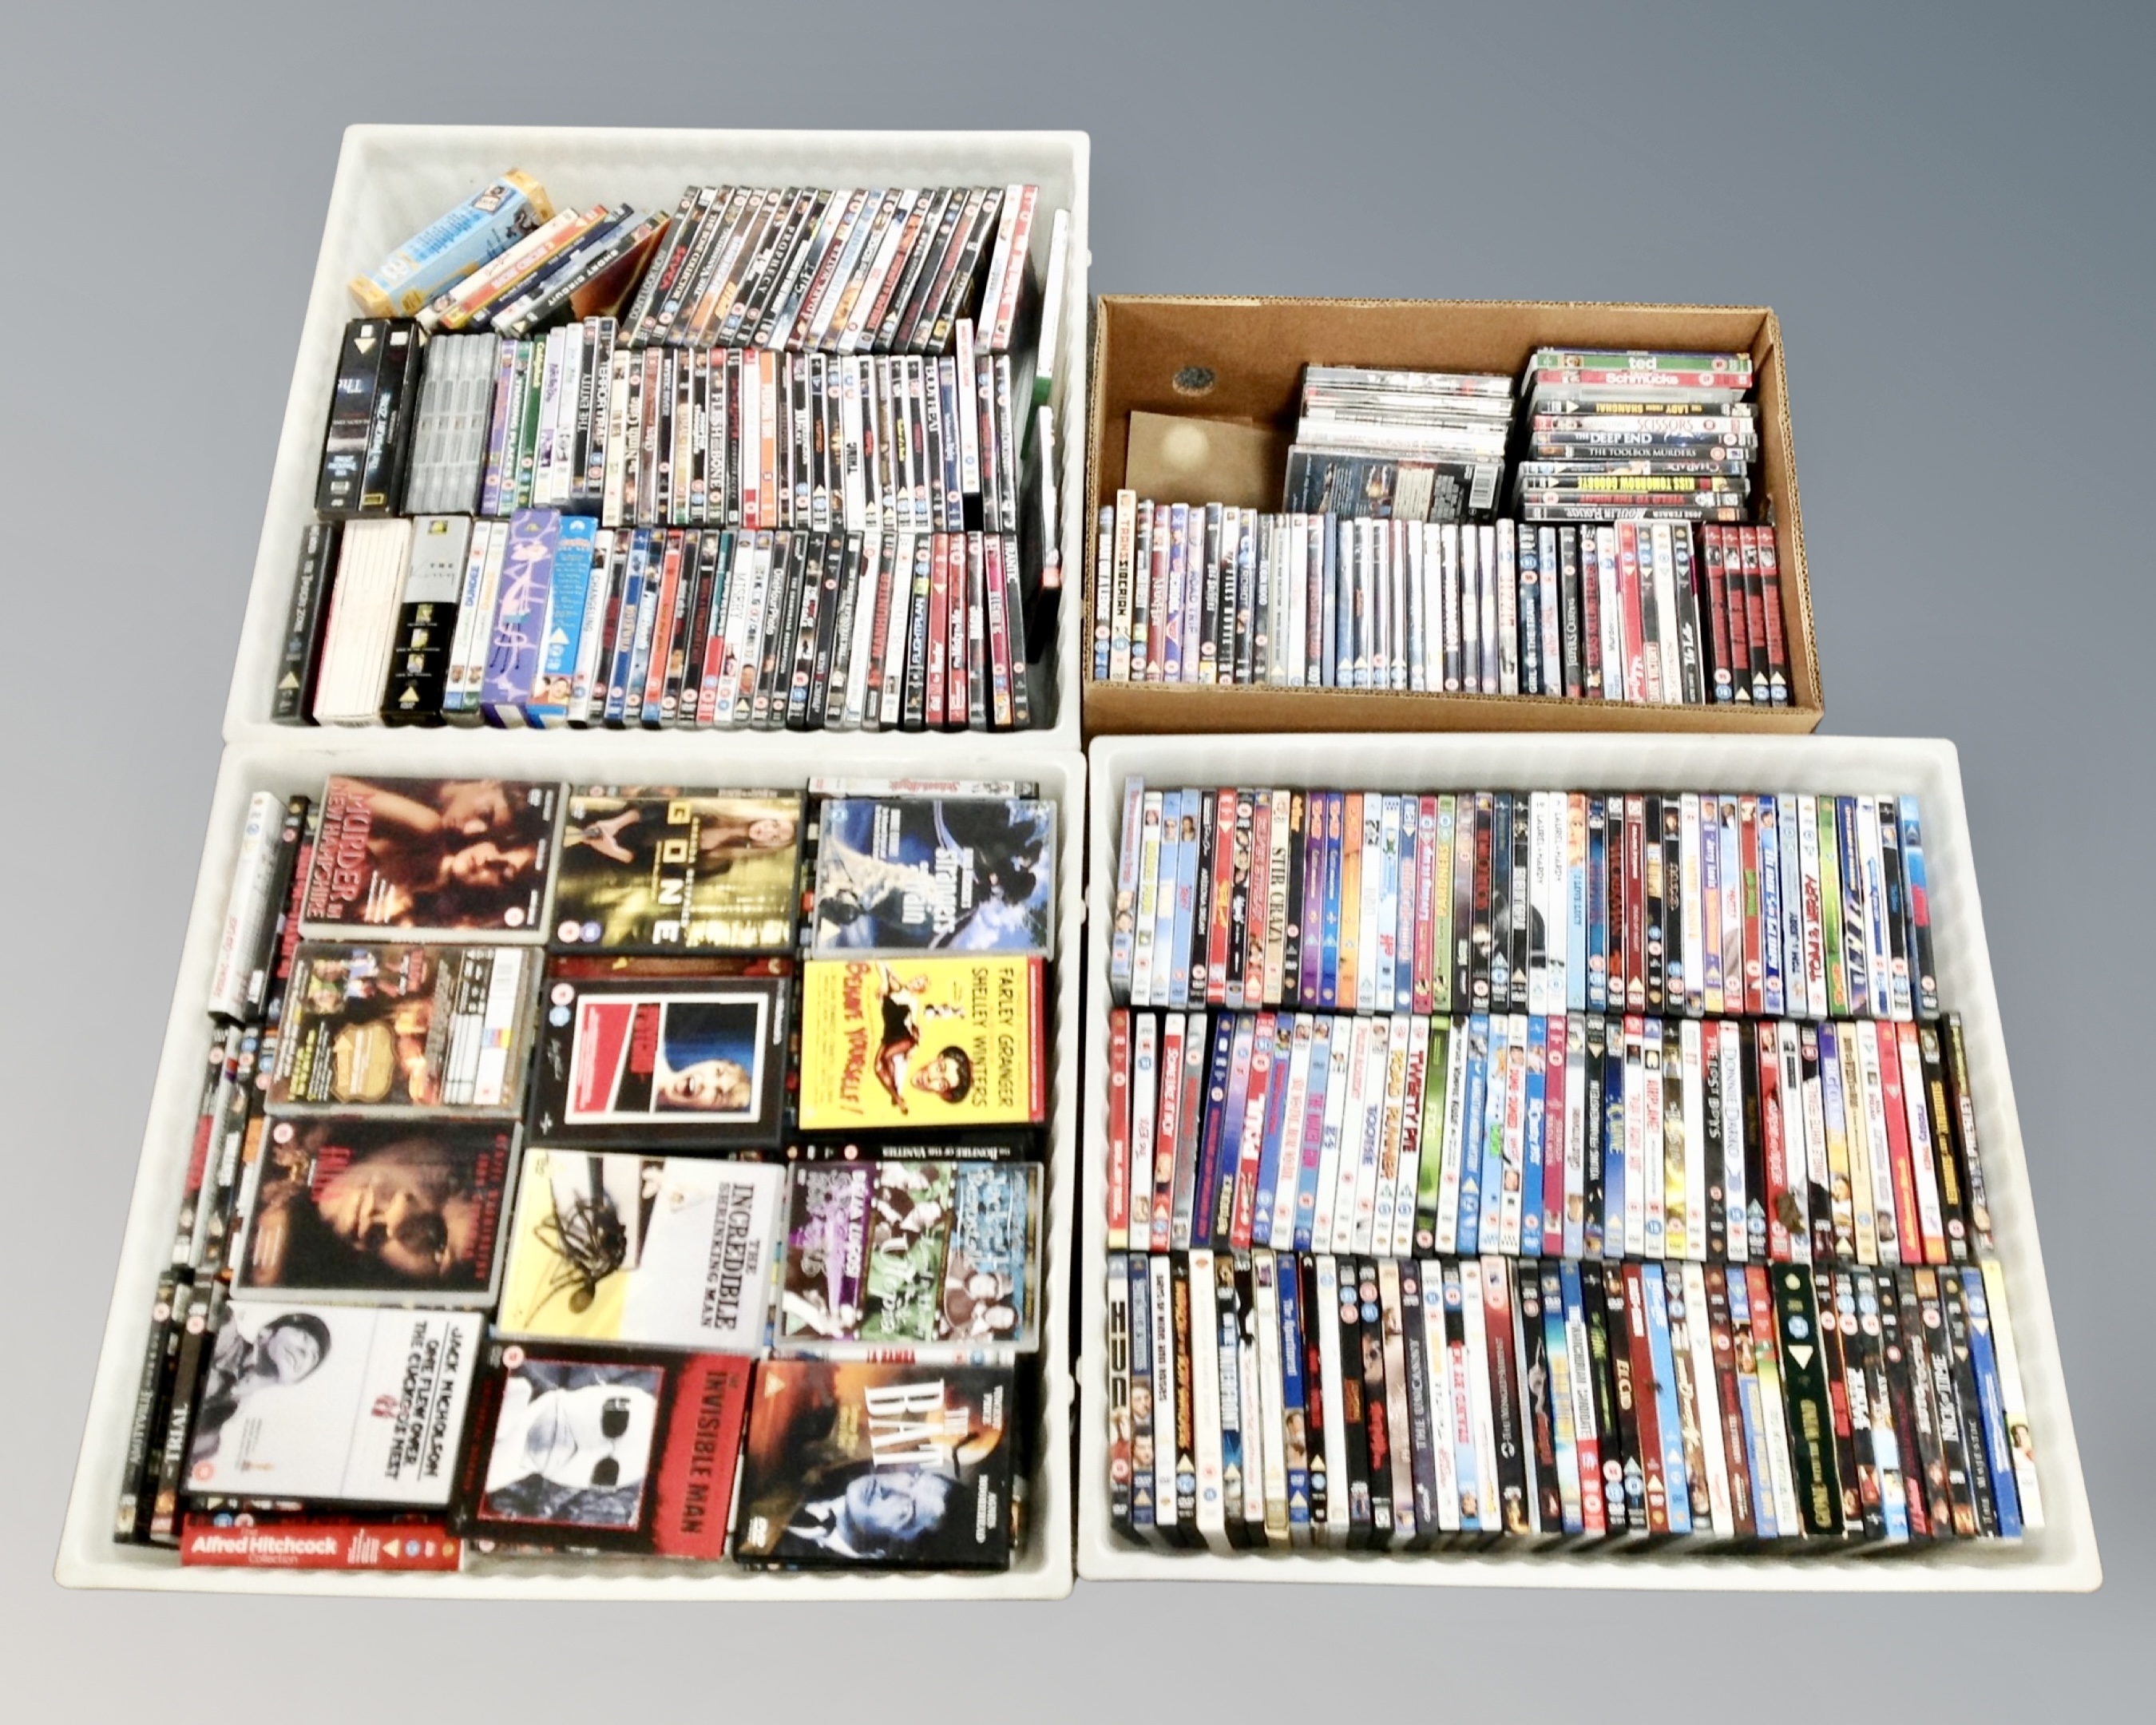 A box and three plastic crates containing a large quantity of DVD movies and box sets.